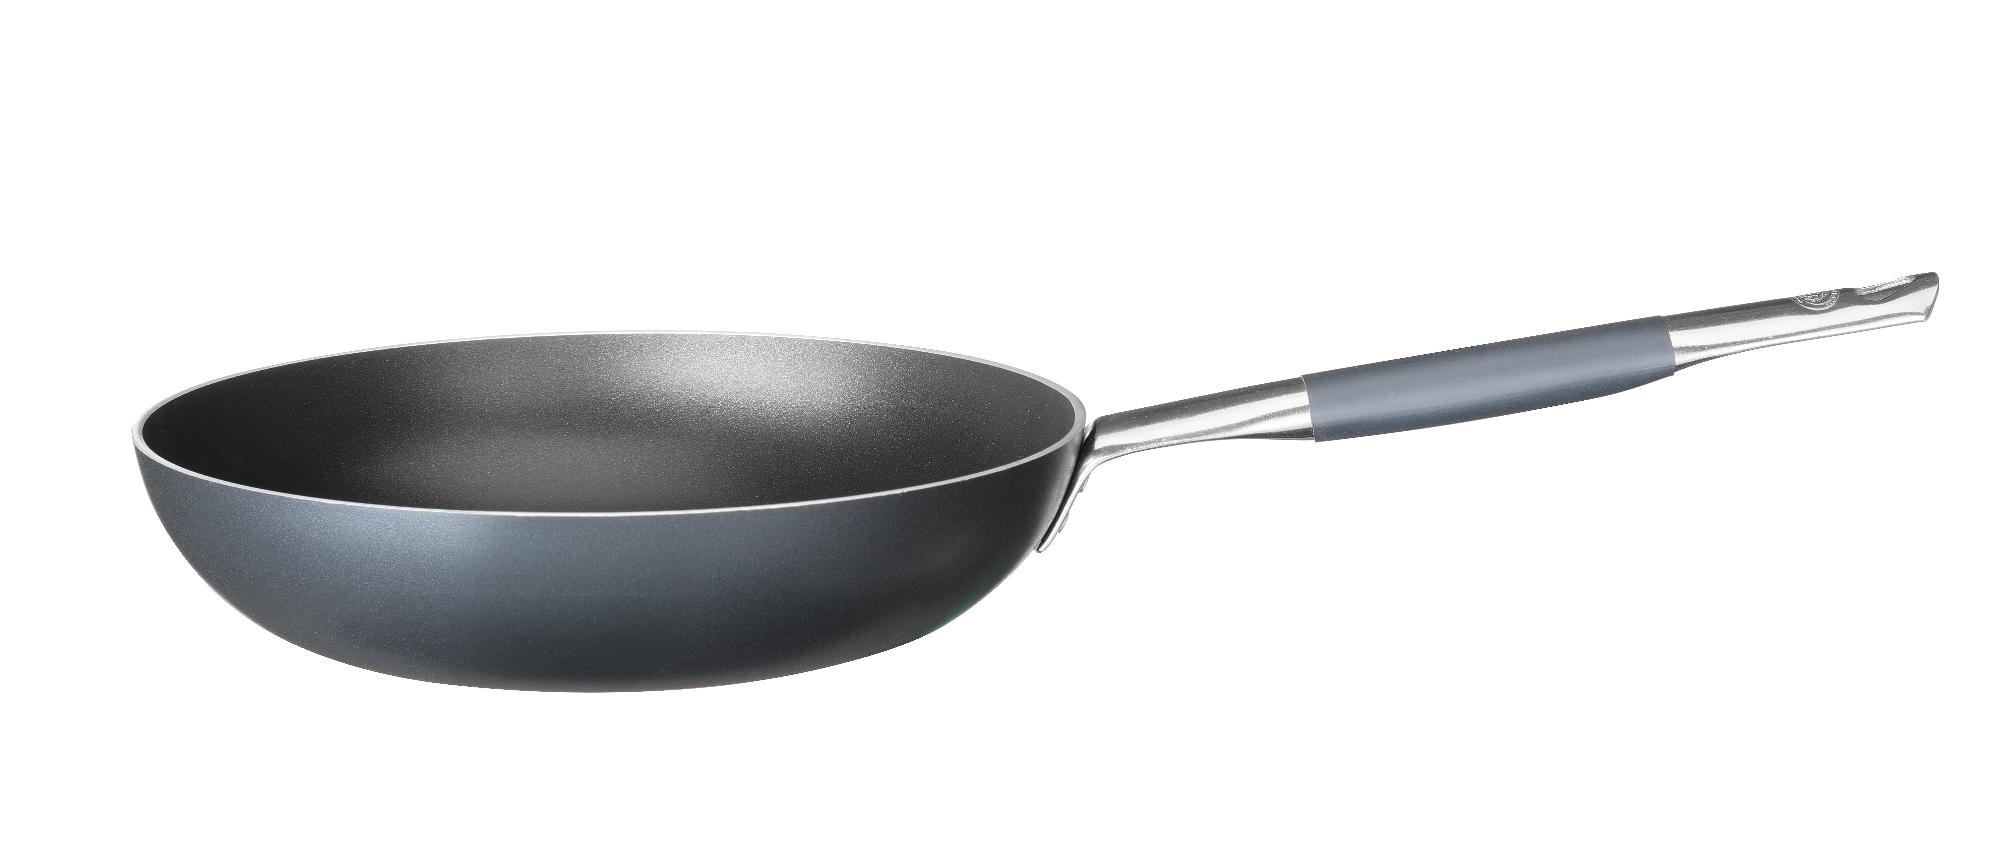 Impressive frying pan with double non-stick coating, 240mm